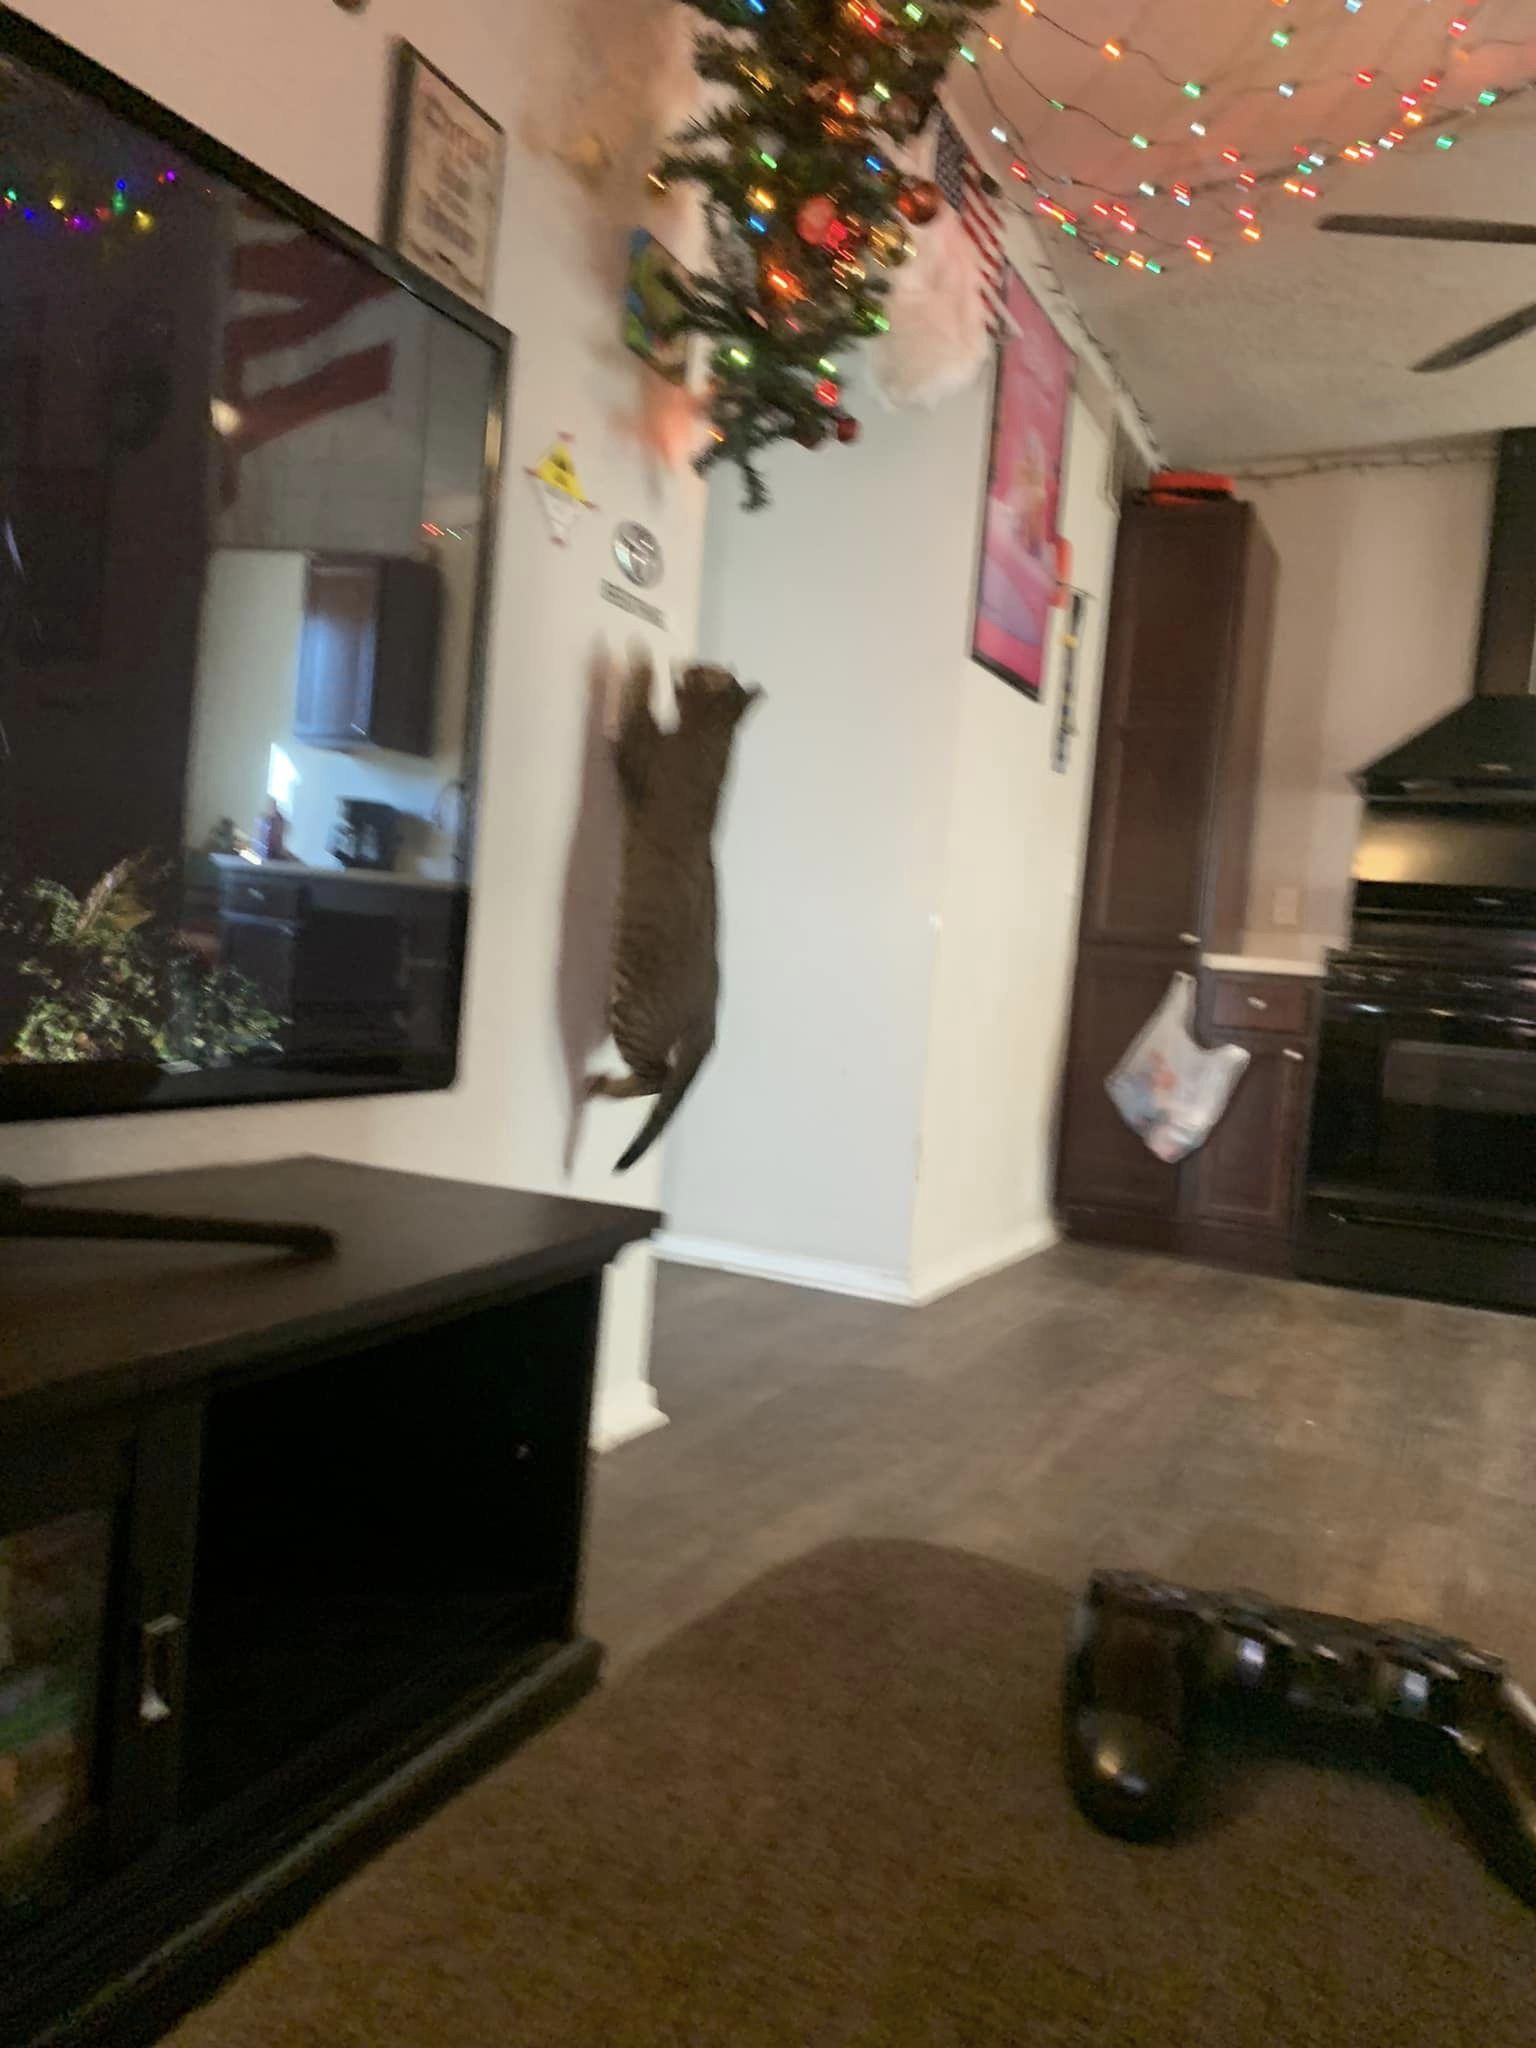 A cat and a Christmas tree